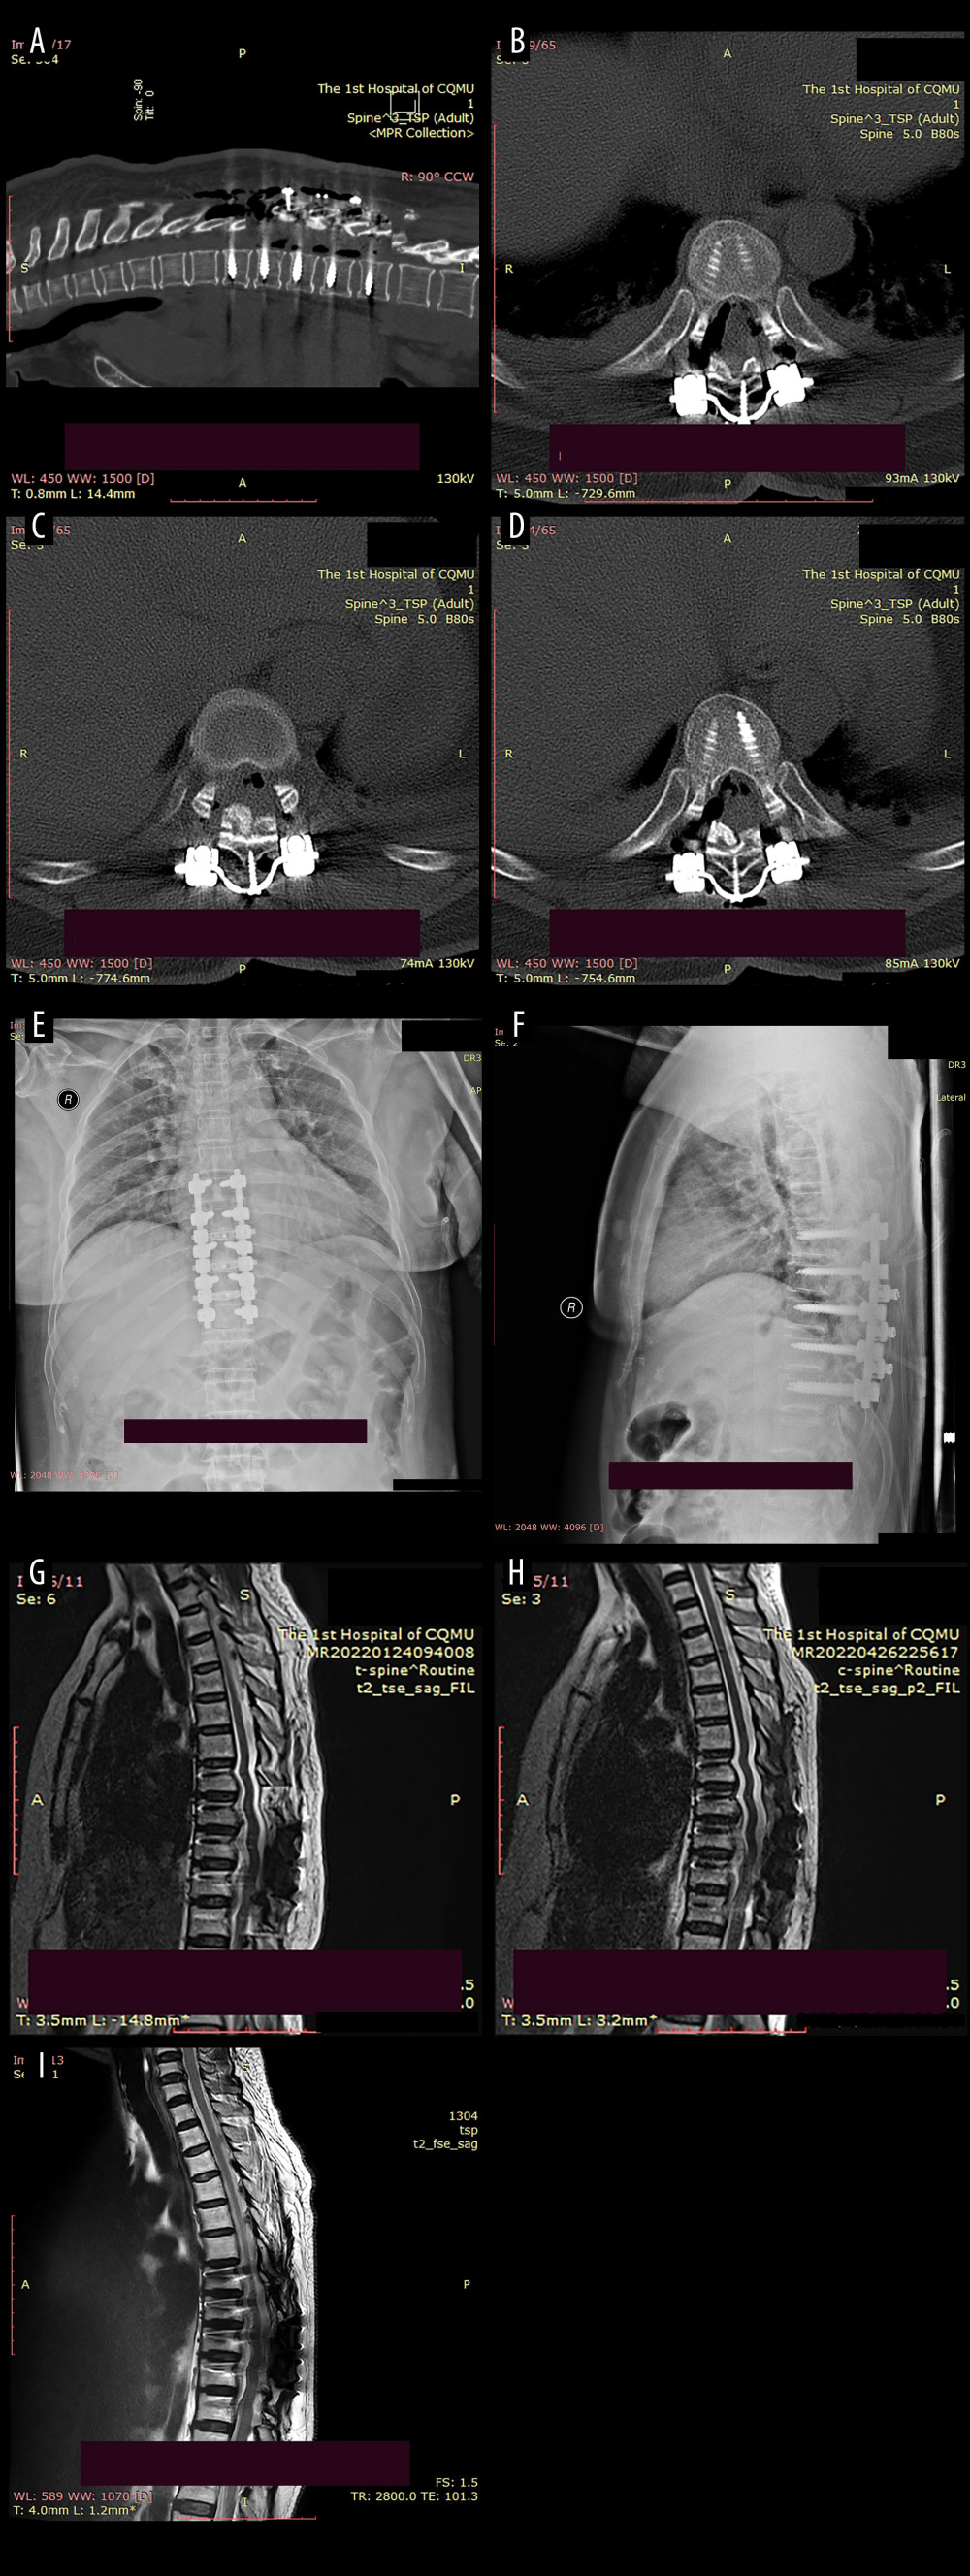 Postoperative imaging data of the patient.(A) The postoperative CT scan revealed a posterior shift of the ossifications and restoration of canal volume. The red area indicates the laminae-OLF complex (LOC). (B) Cross-bridge and screws in T8/T9. (C) Cross-bridge and screws in T9/T10. (D) Cross-bridge and screws in T10/T11. (E, F) Postoperative radiographs of the patient indicated local internal fixation and cross-bridges are in place without deviation. (G–I) MRI scans at 1 week, 3 months, and 1-year after surgery revealed a posterior migration of ossifications, with no abnormal signals detected in the spinal cord.